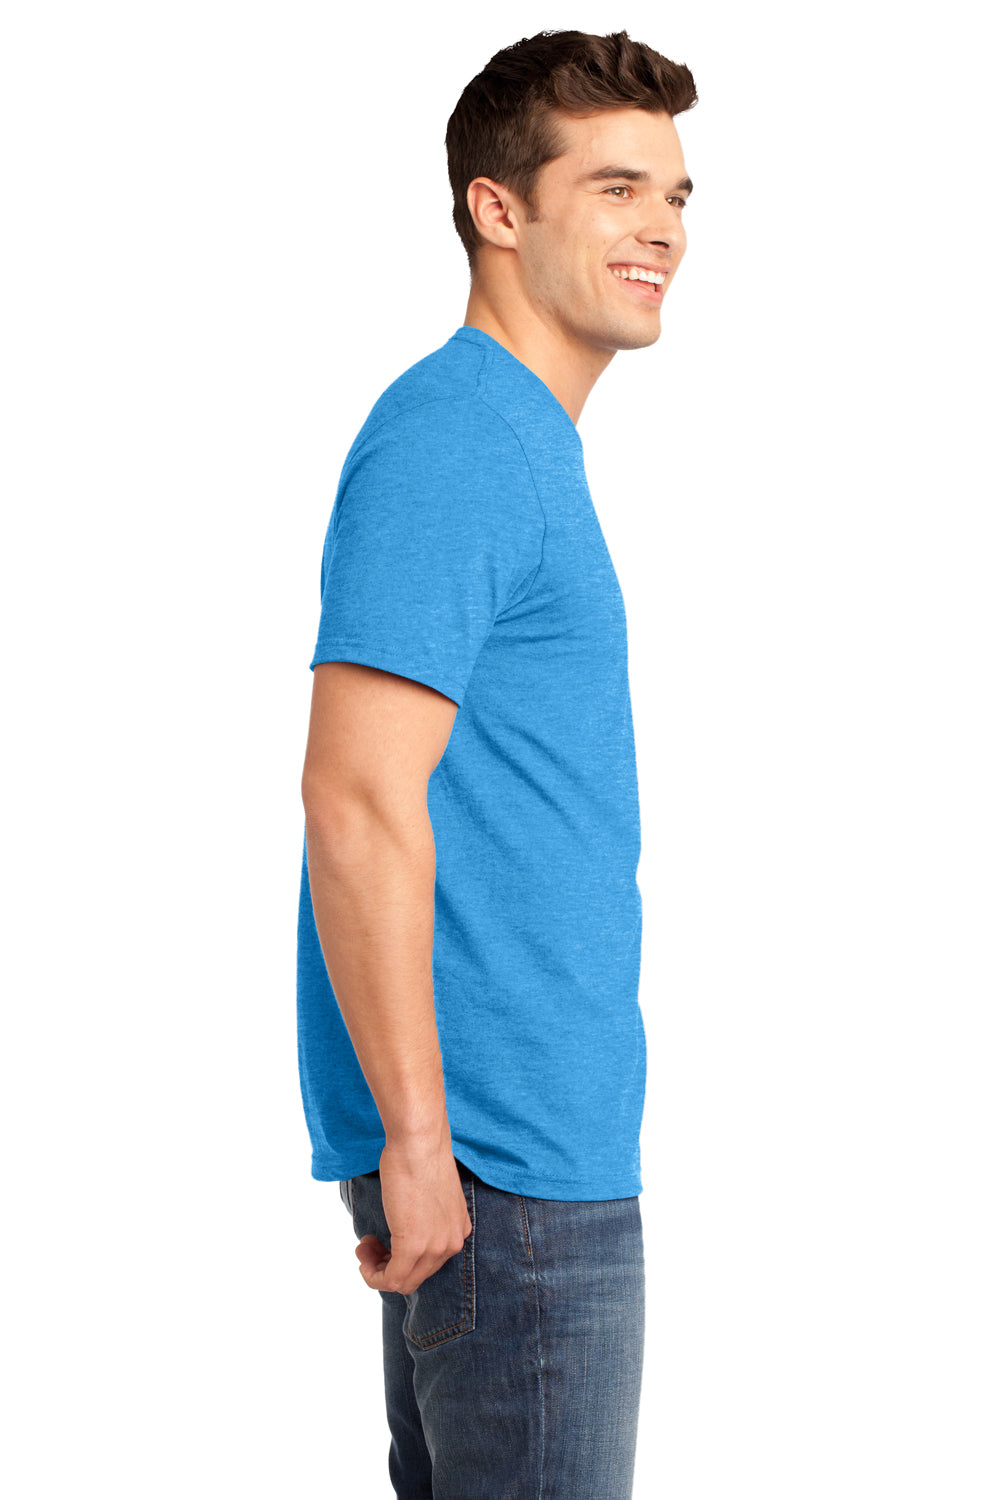 District DT6000 Mens Very Important Short Sleeve Crewneck T-Shirt Heather Turquoise Blue Side